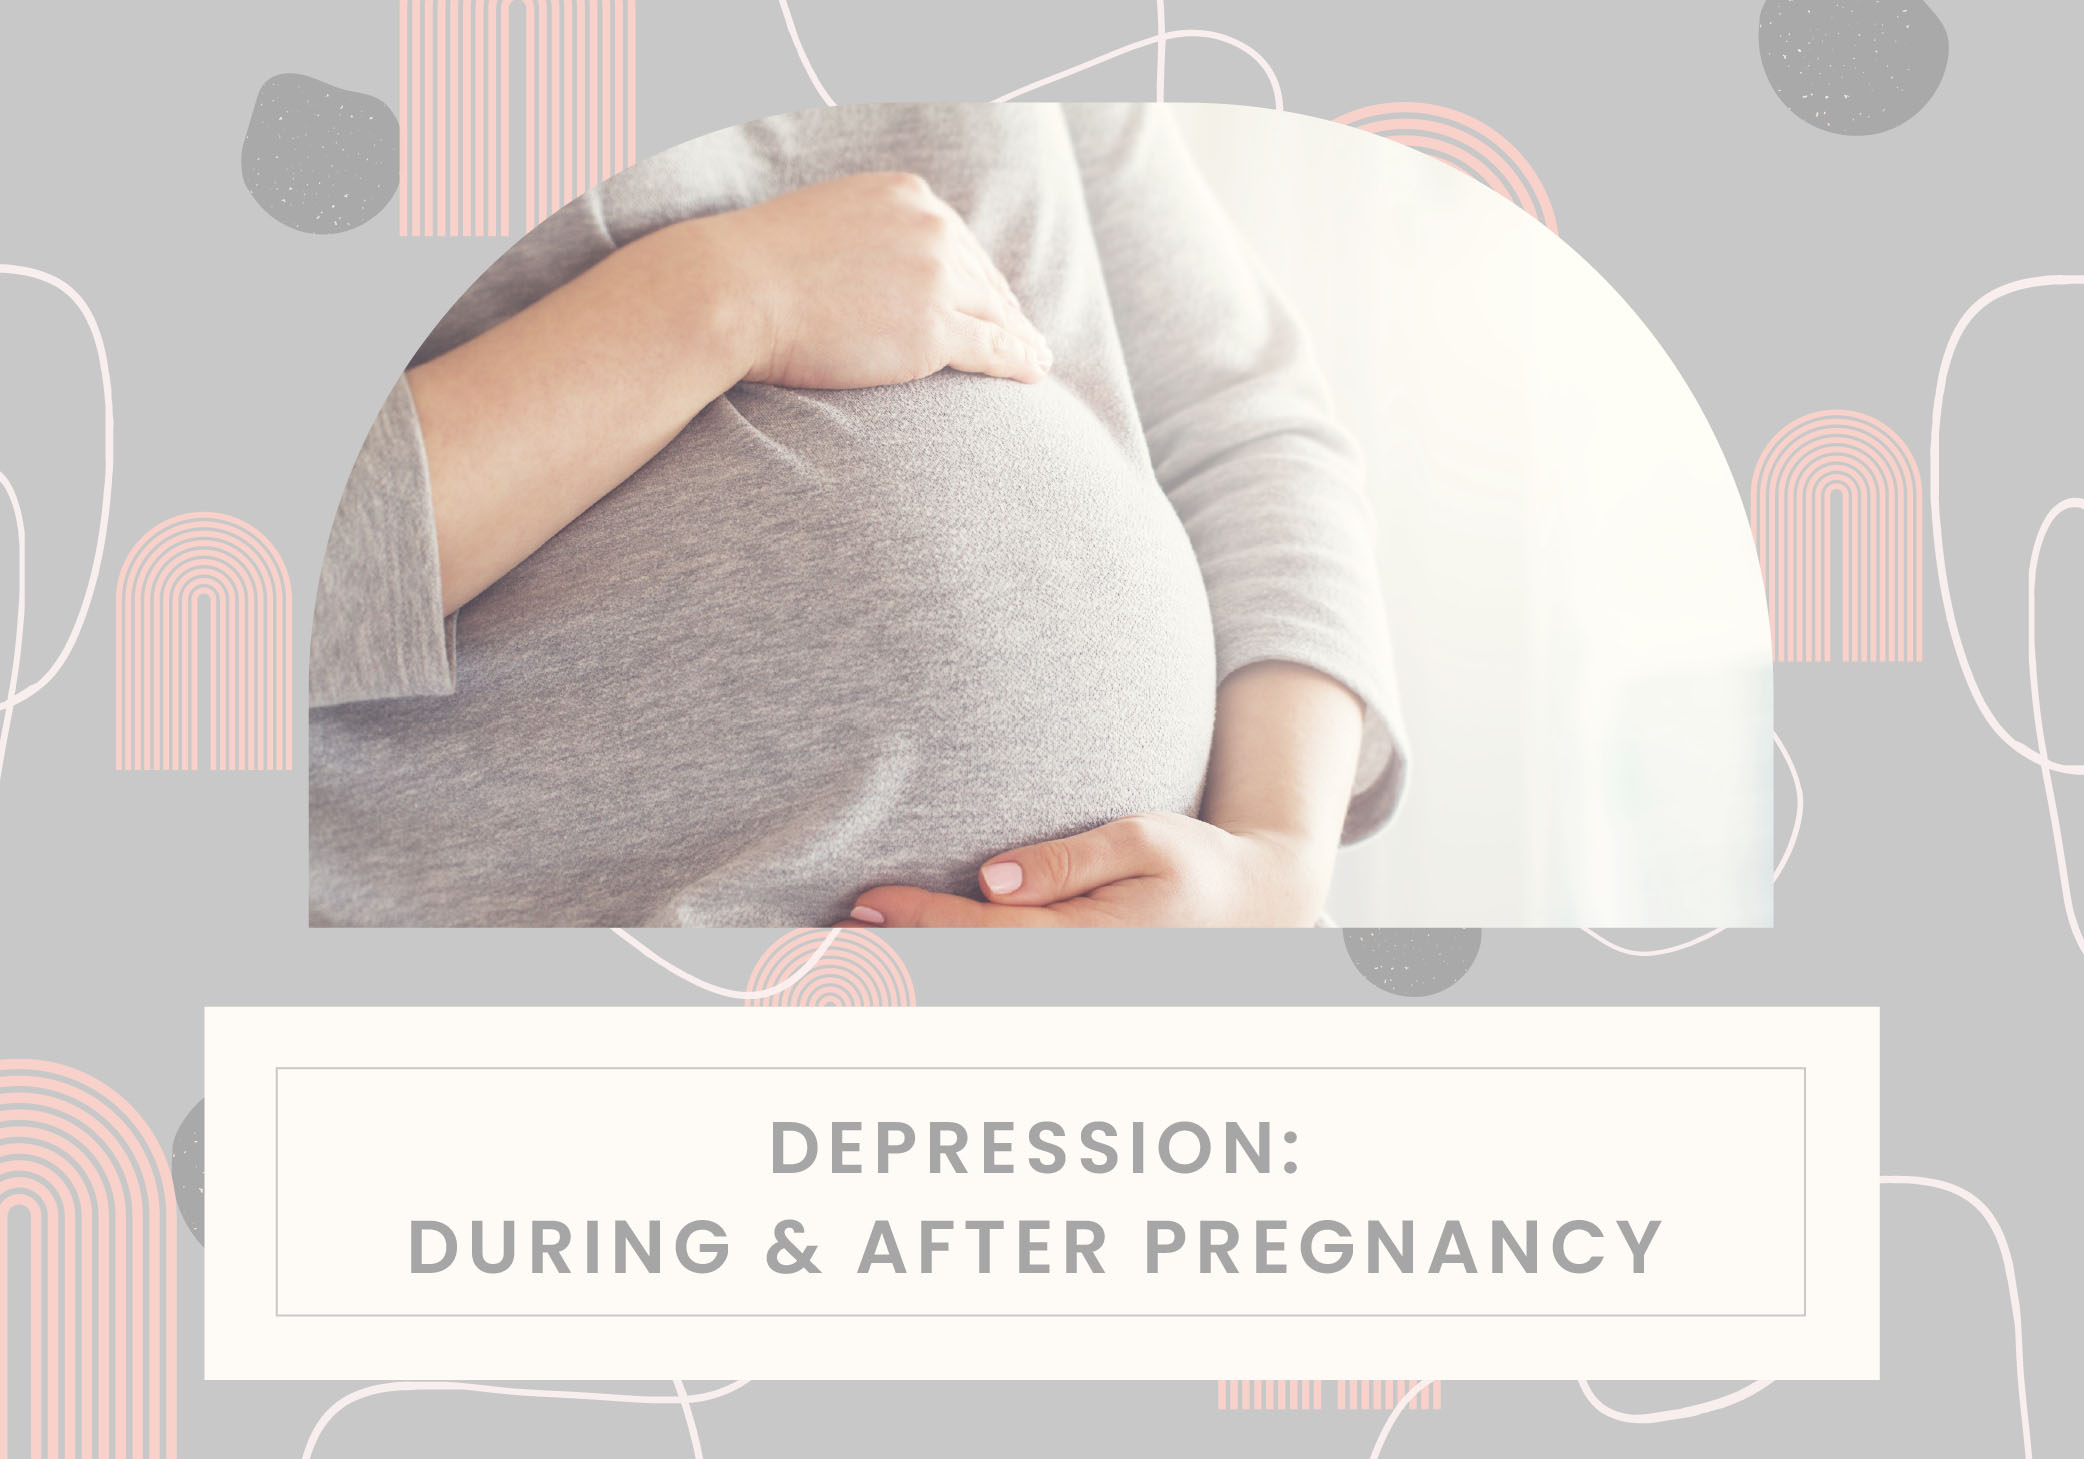 Depression: During and After Pregnancy